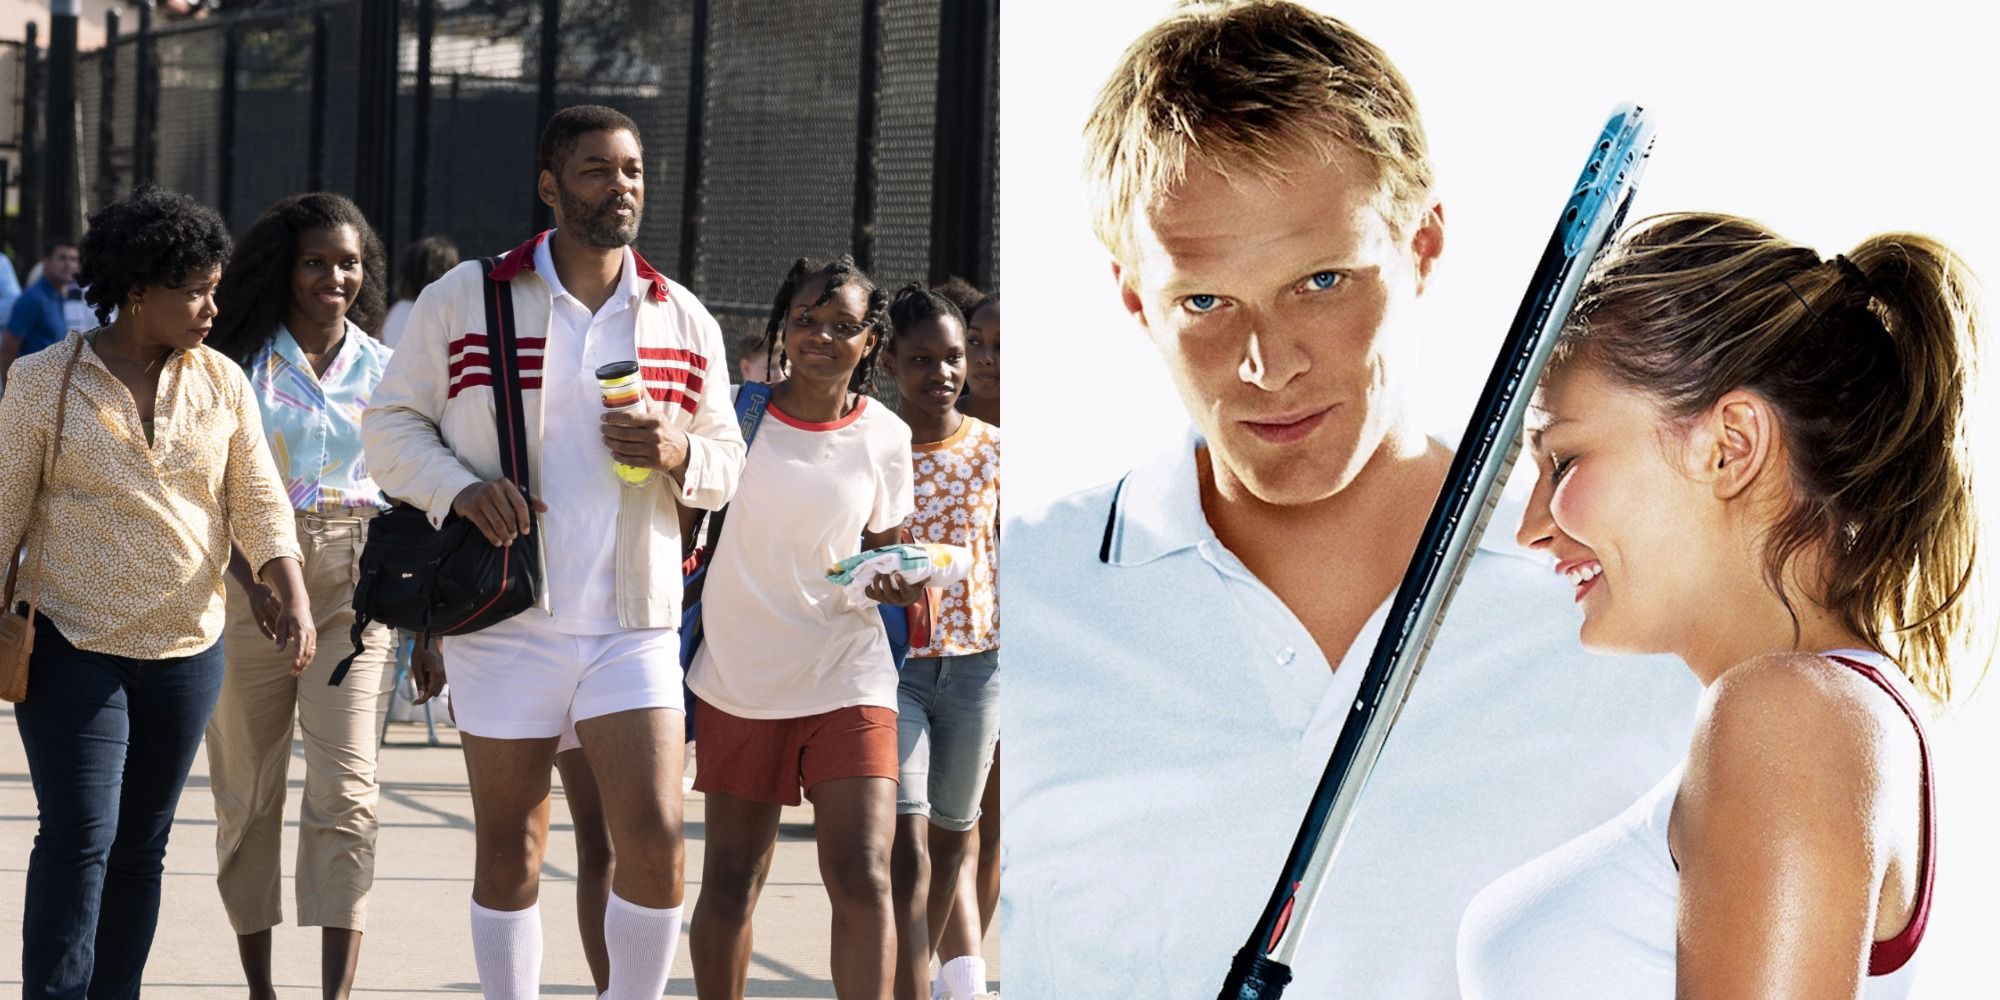 A split image showing characters from King Richard and Wimbledon